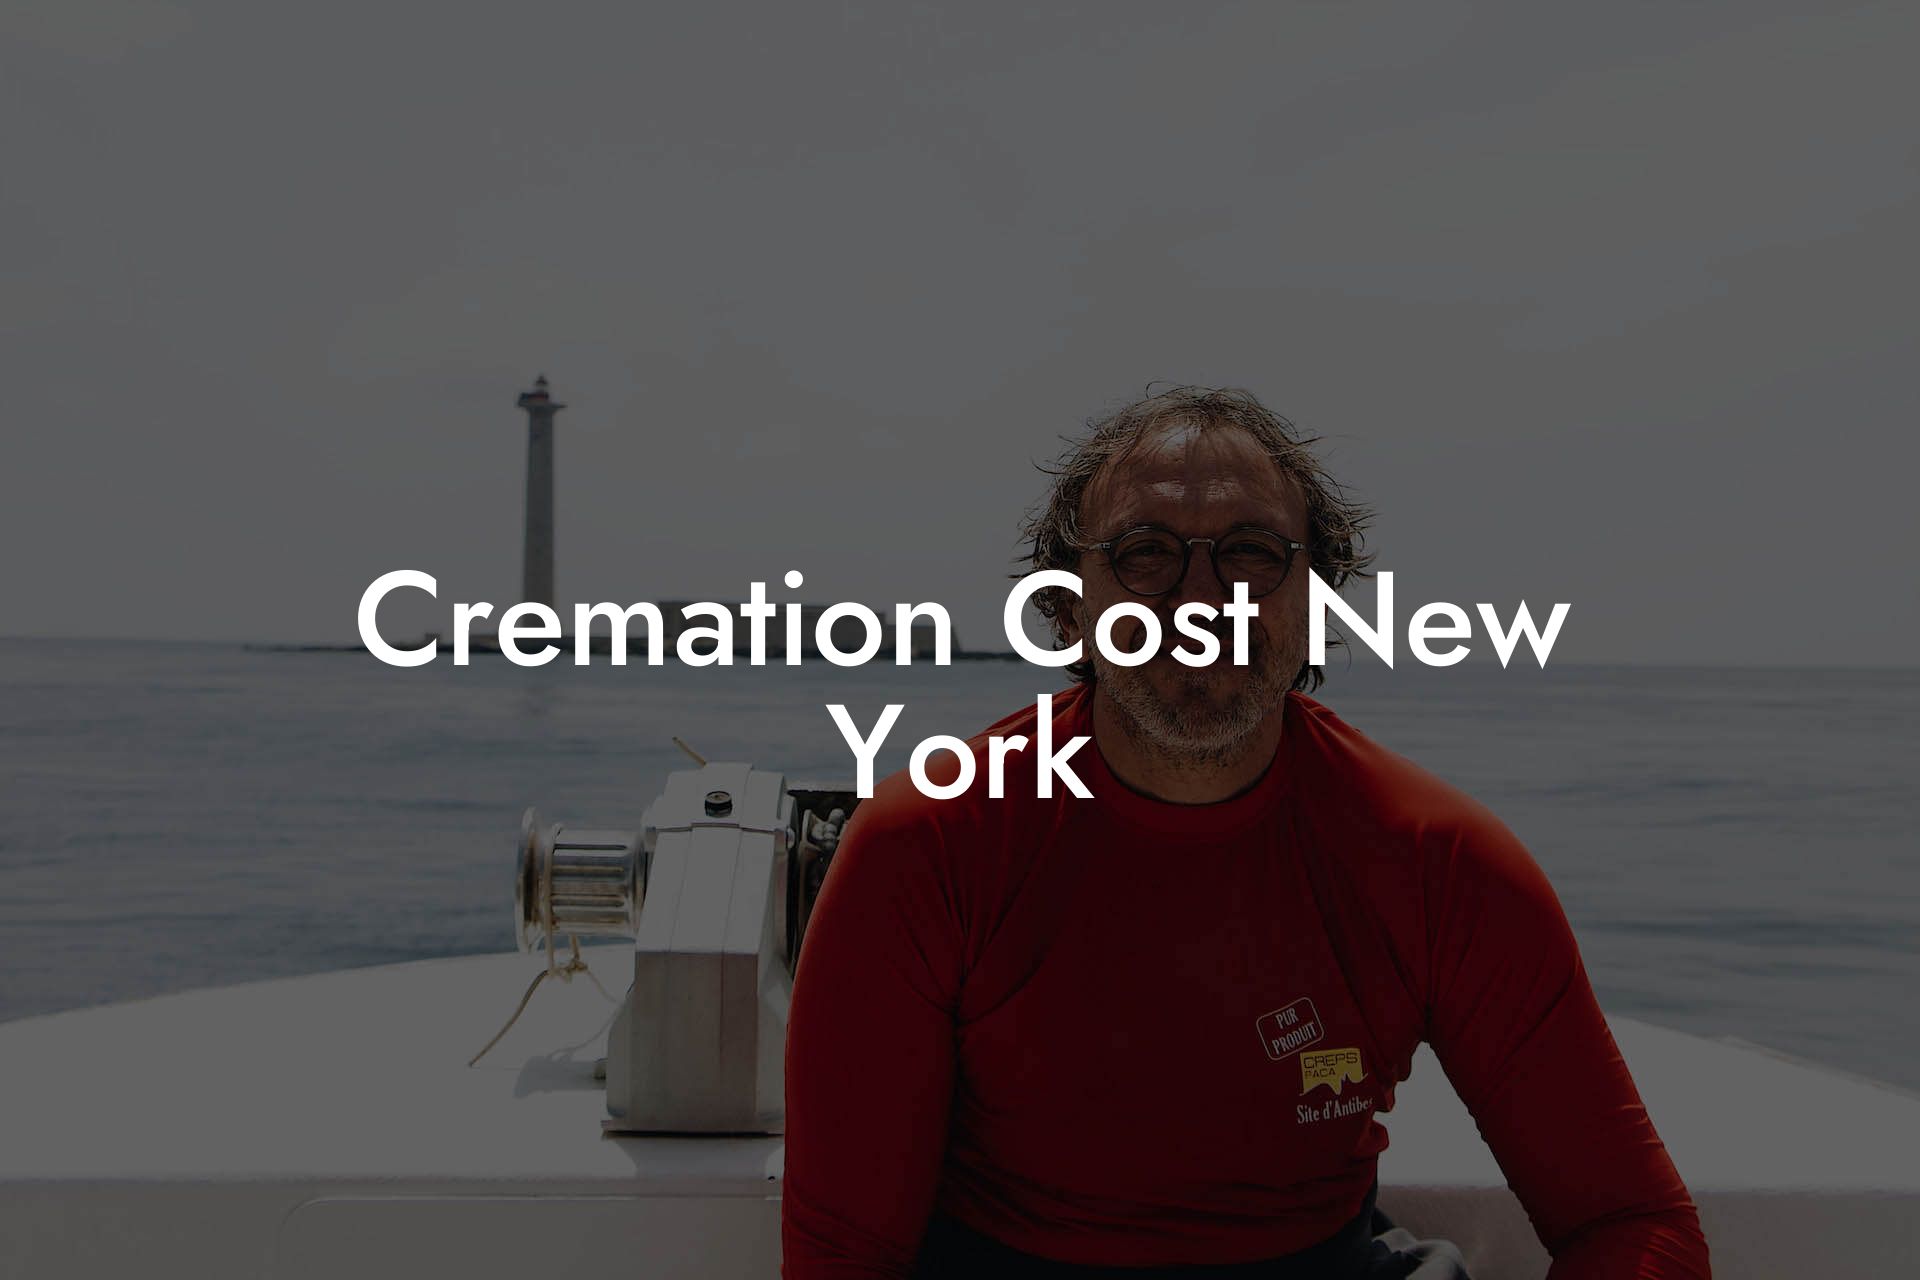 Cremation Cost New York